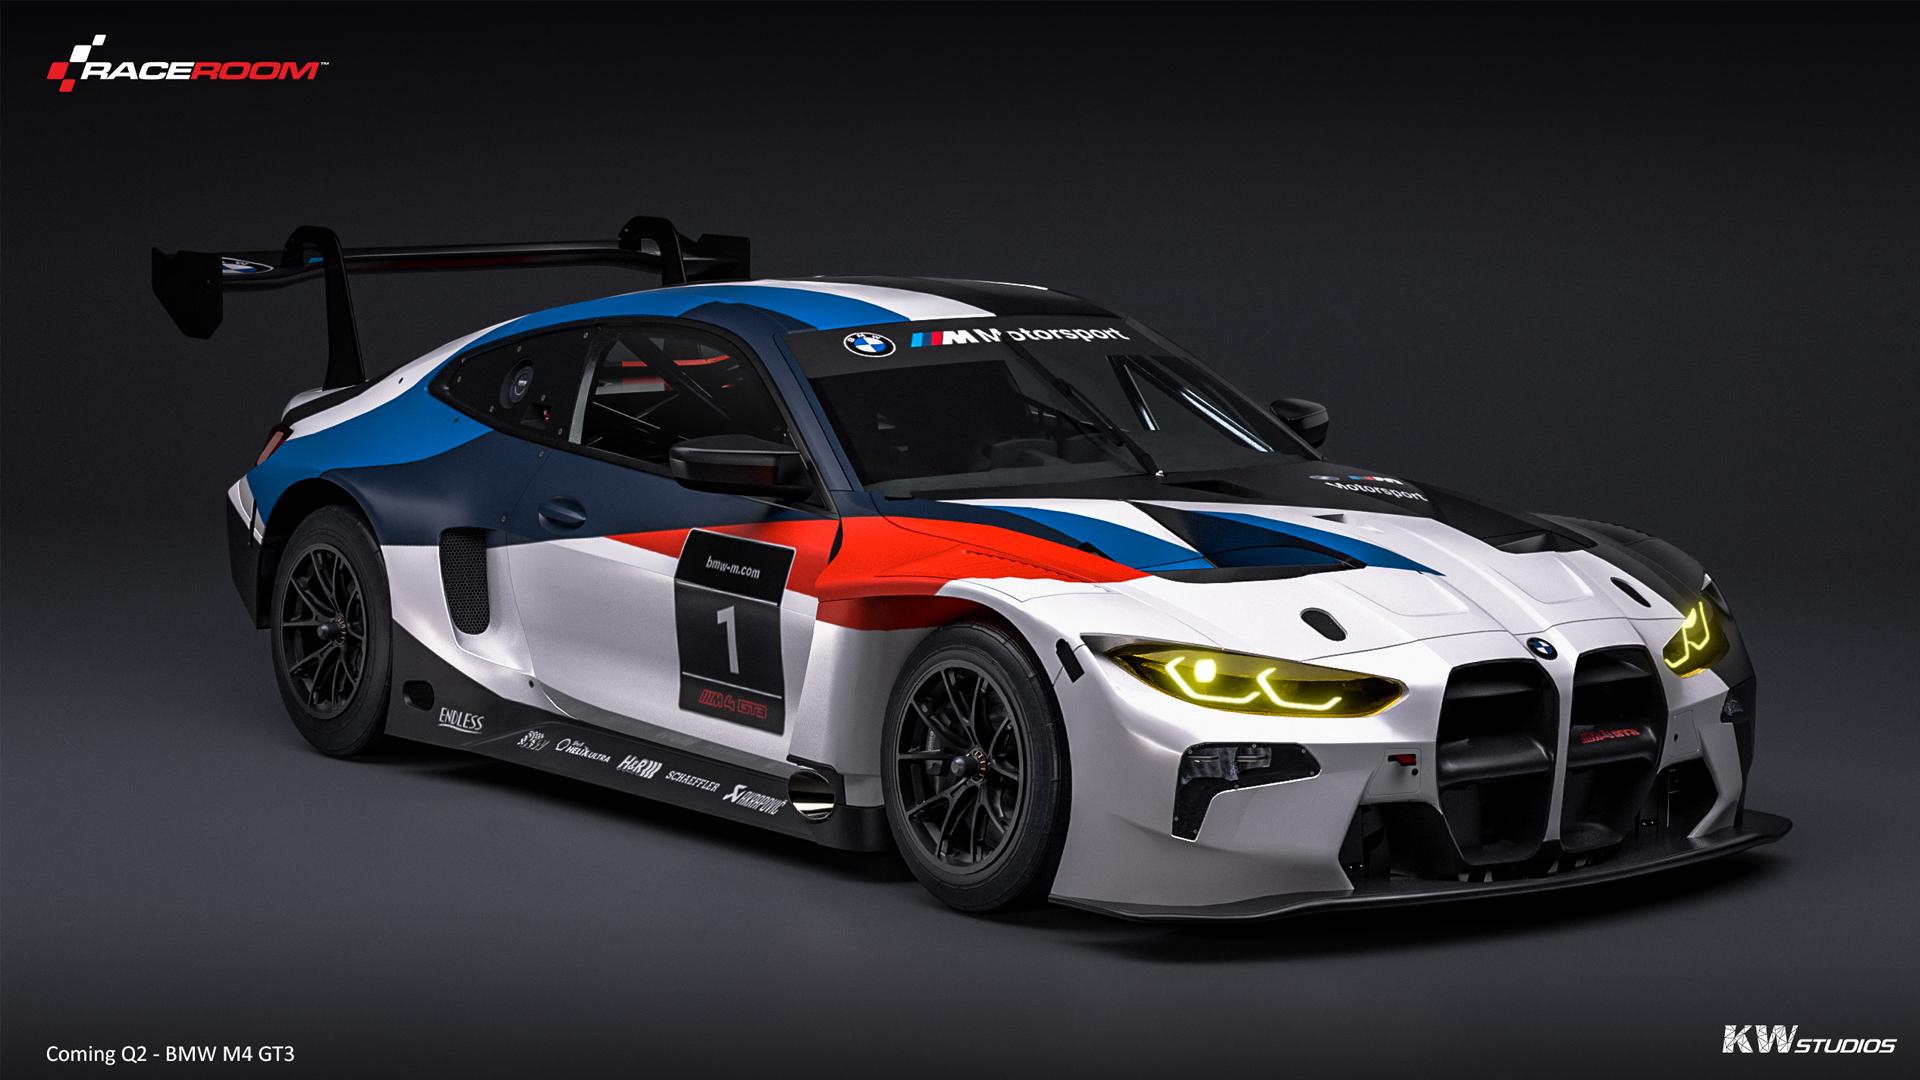 BMW-M4-GT3-Pau-and-three-new-Porsches-headed-to-RaceRoom-in-2023.jpg